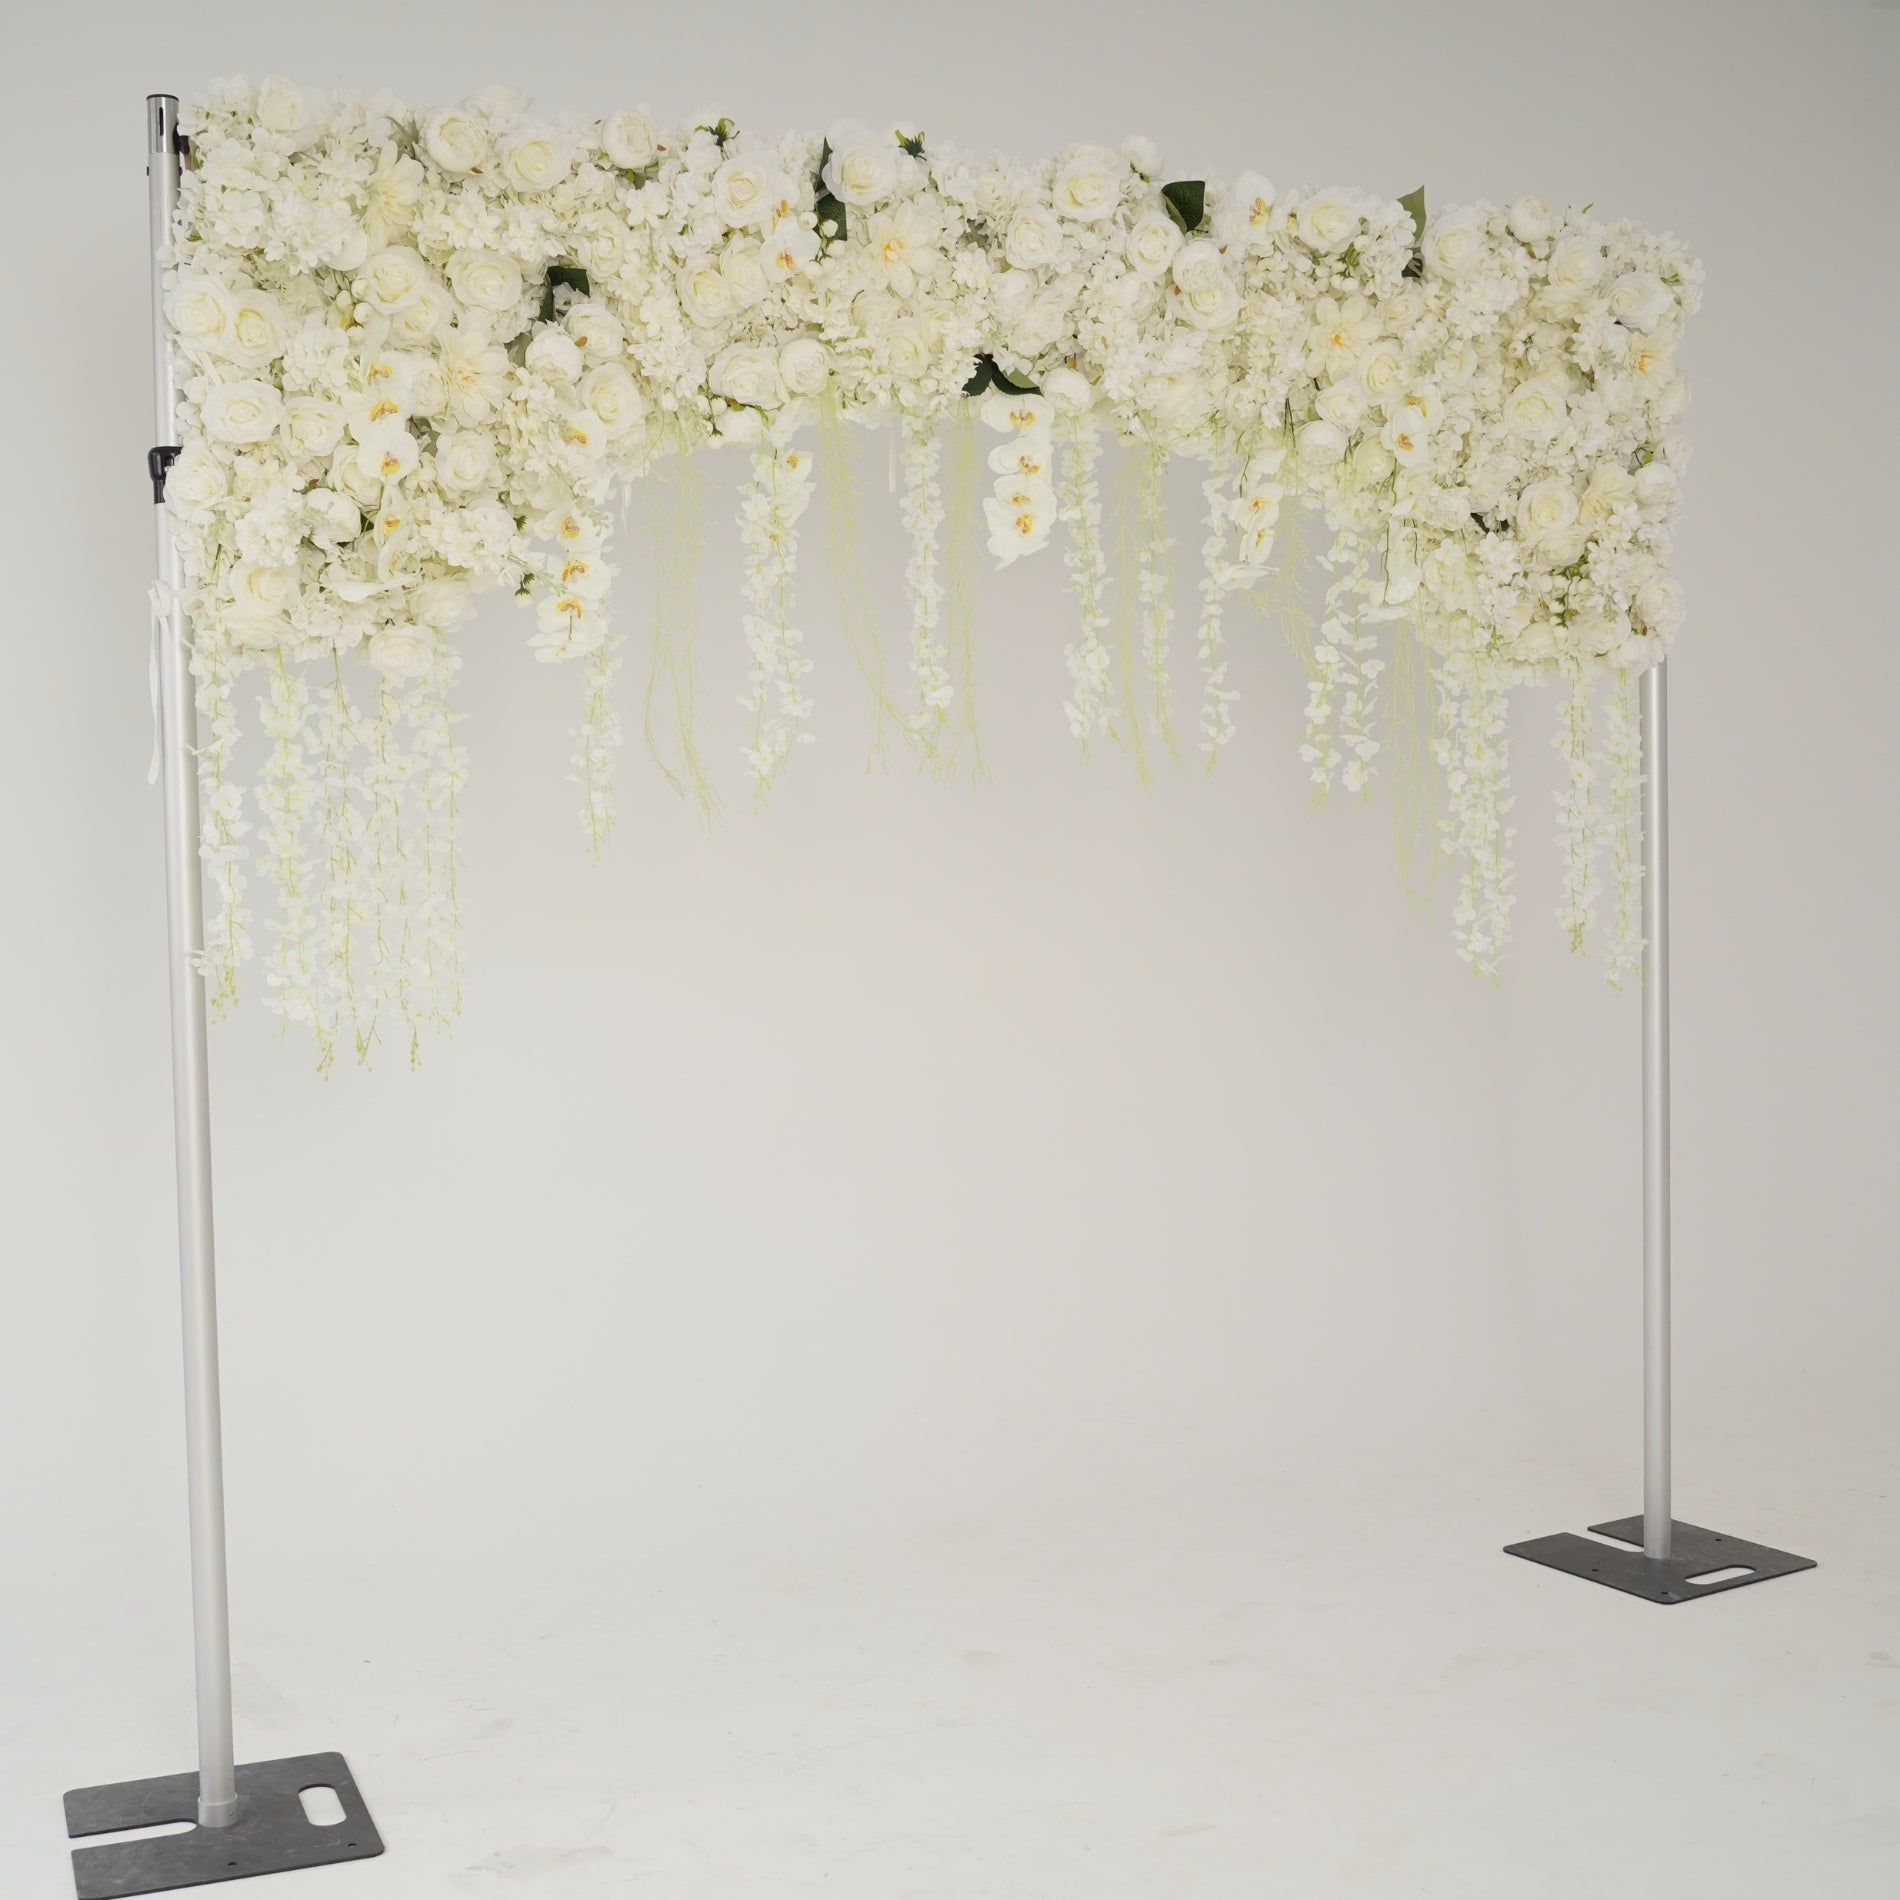 Flower Wall Cream White Florals Cover Wedding Party Proposal Decor